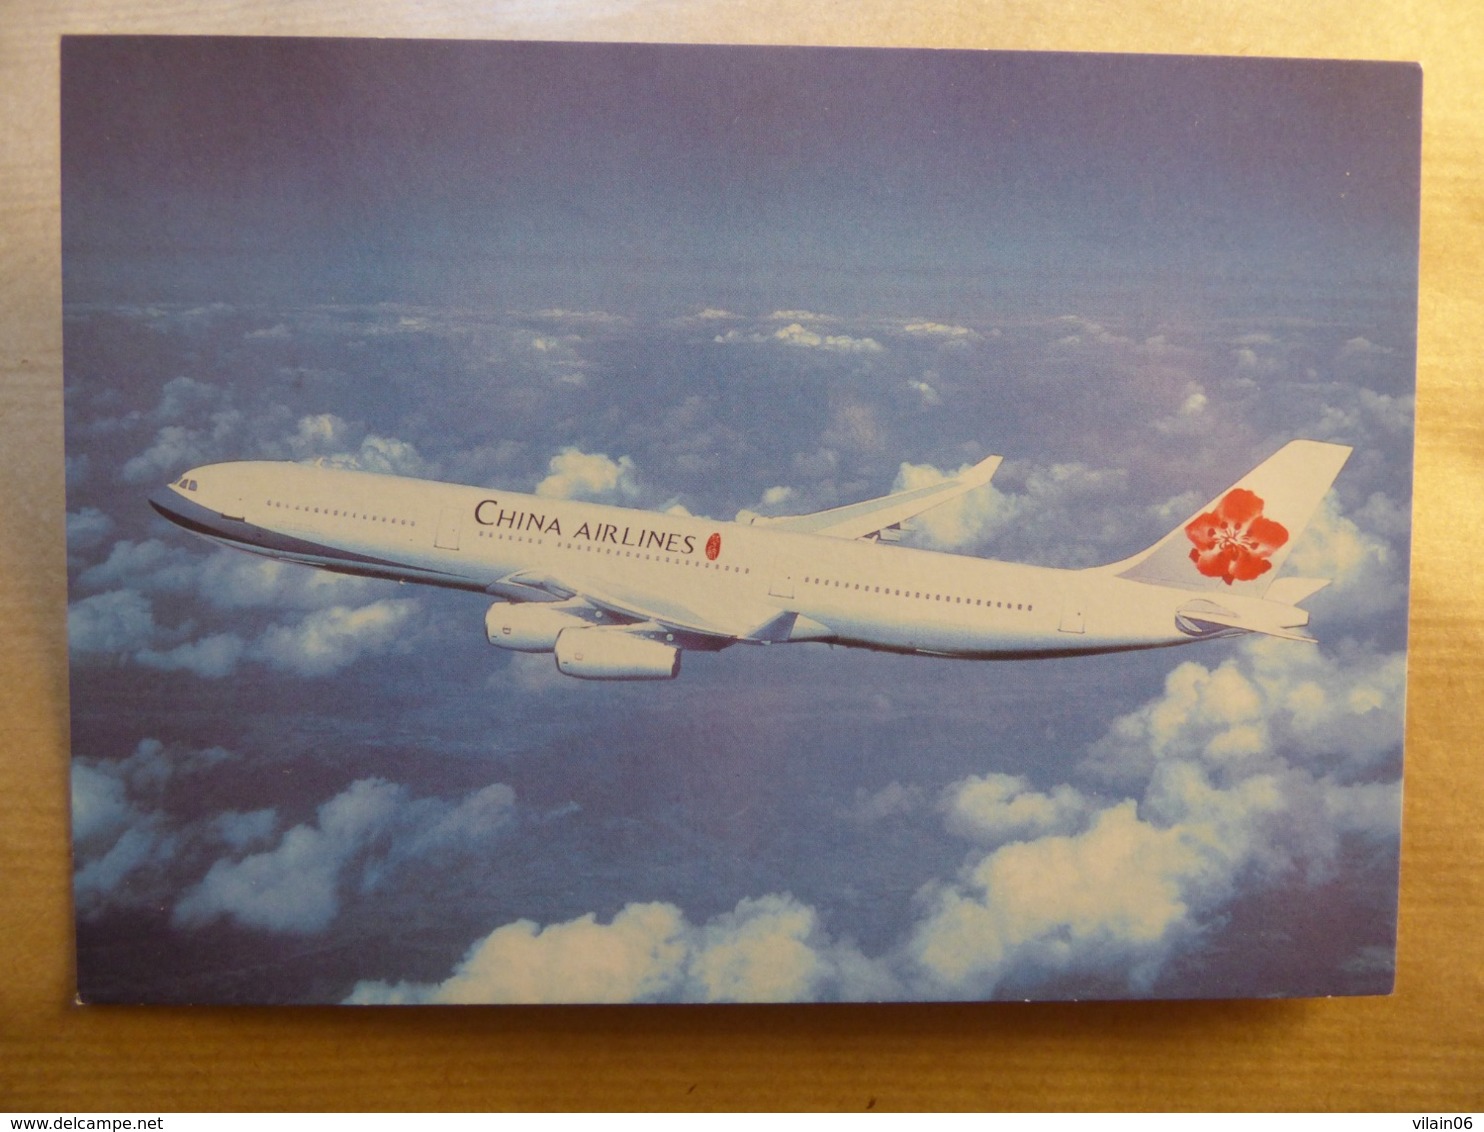 CHINA AIRLINES   A 340  AIRLINE ISSUE / CARTE COMPAGNIE - 1946-....: Era Moderna